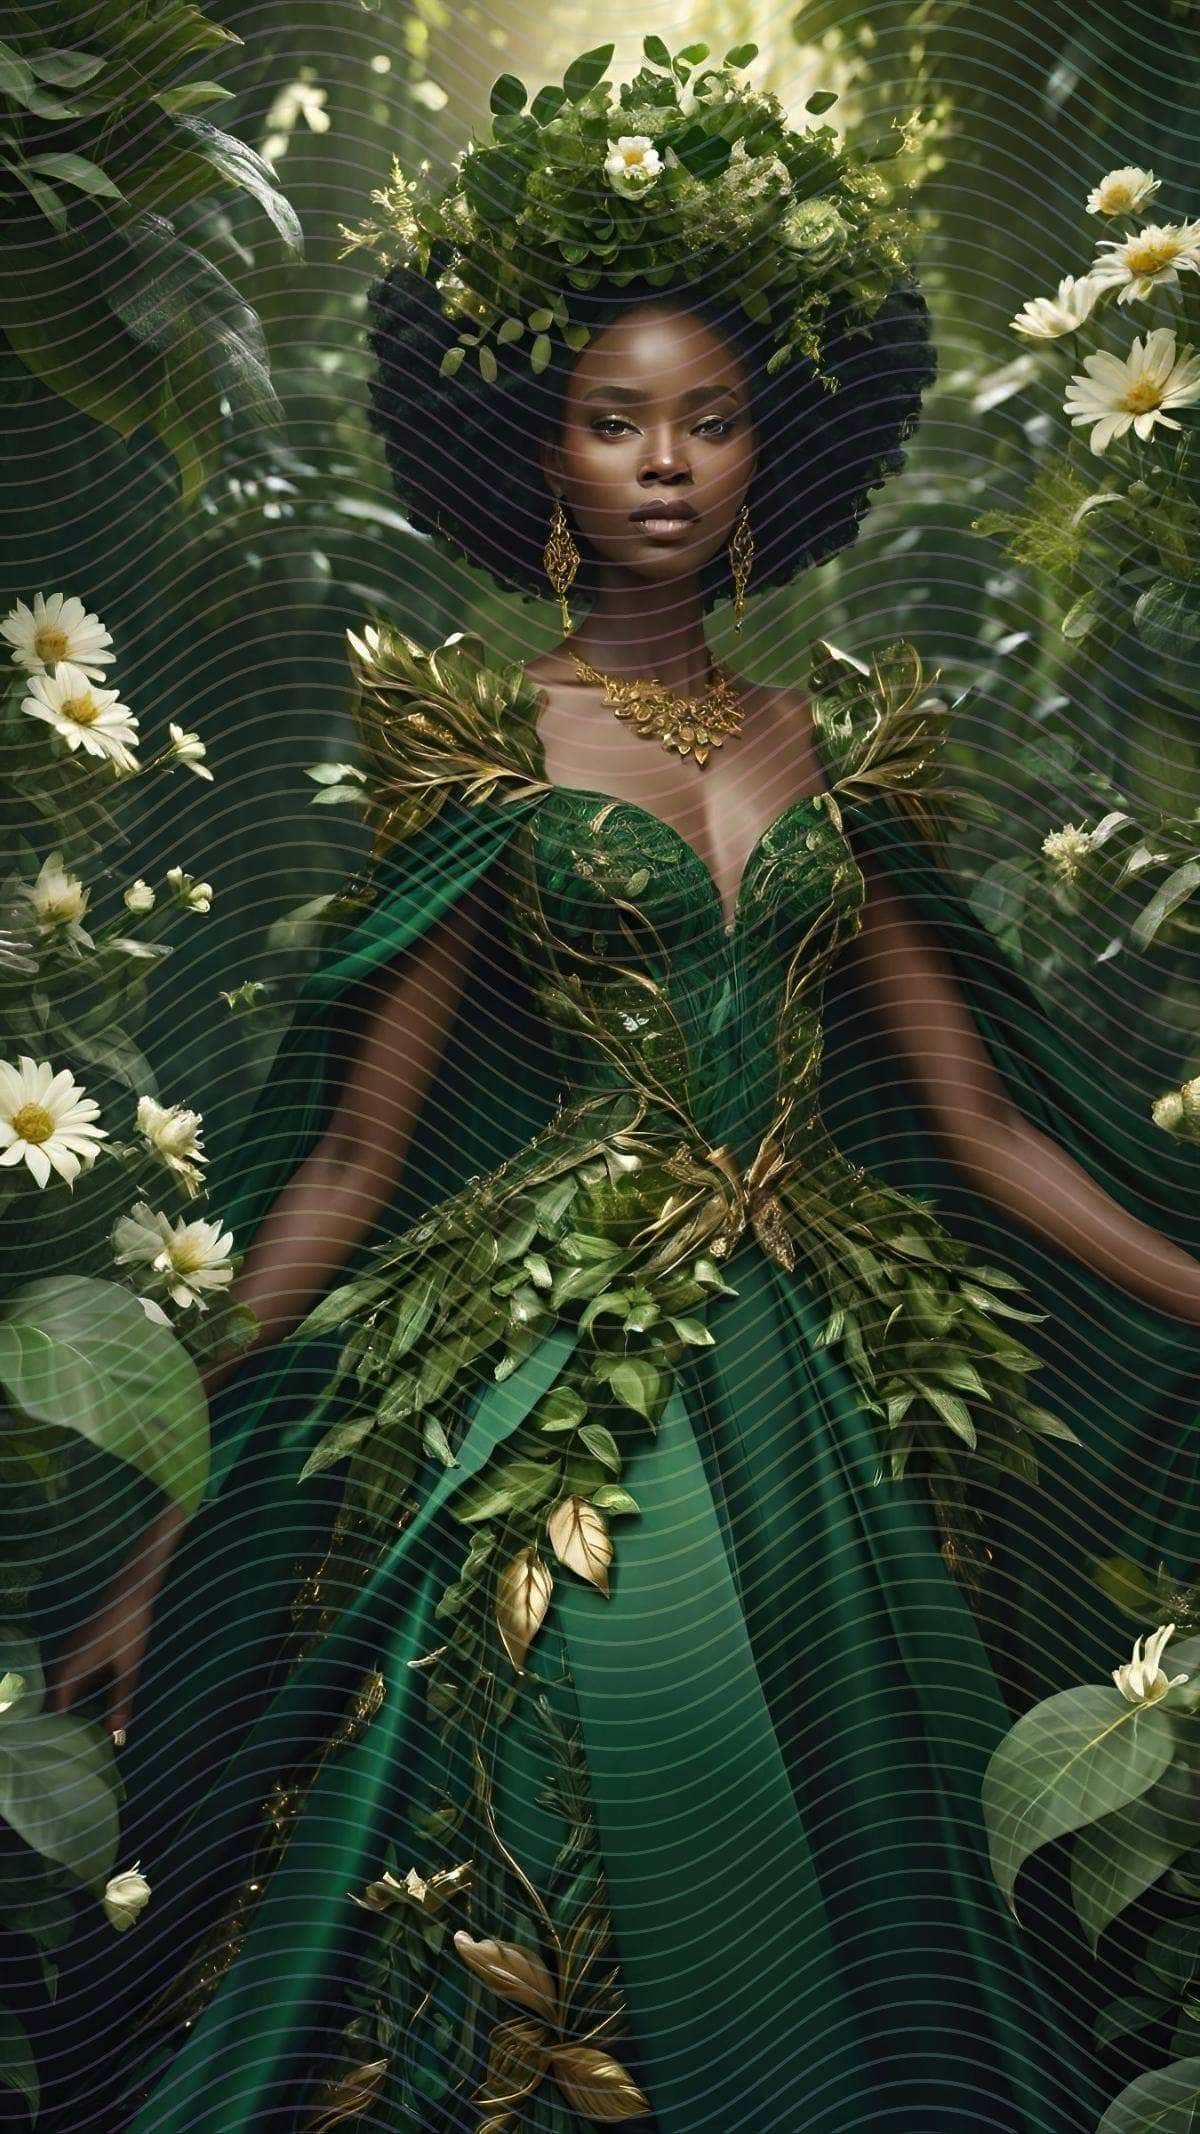 Portrait Of An African Woman In An Intricate Fantasy Dress